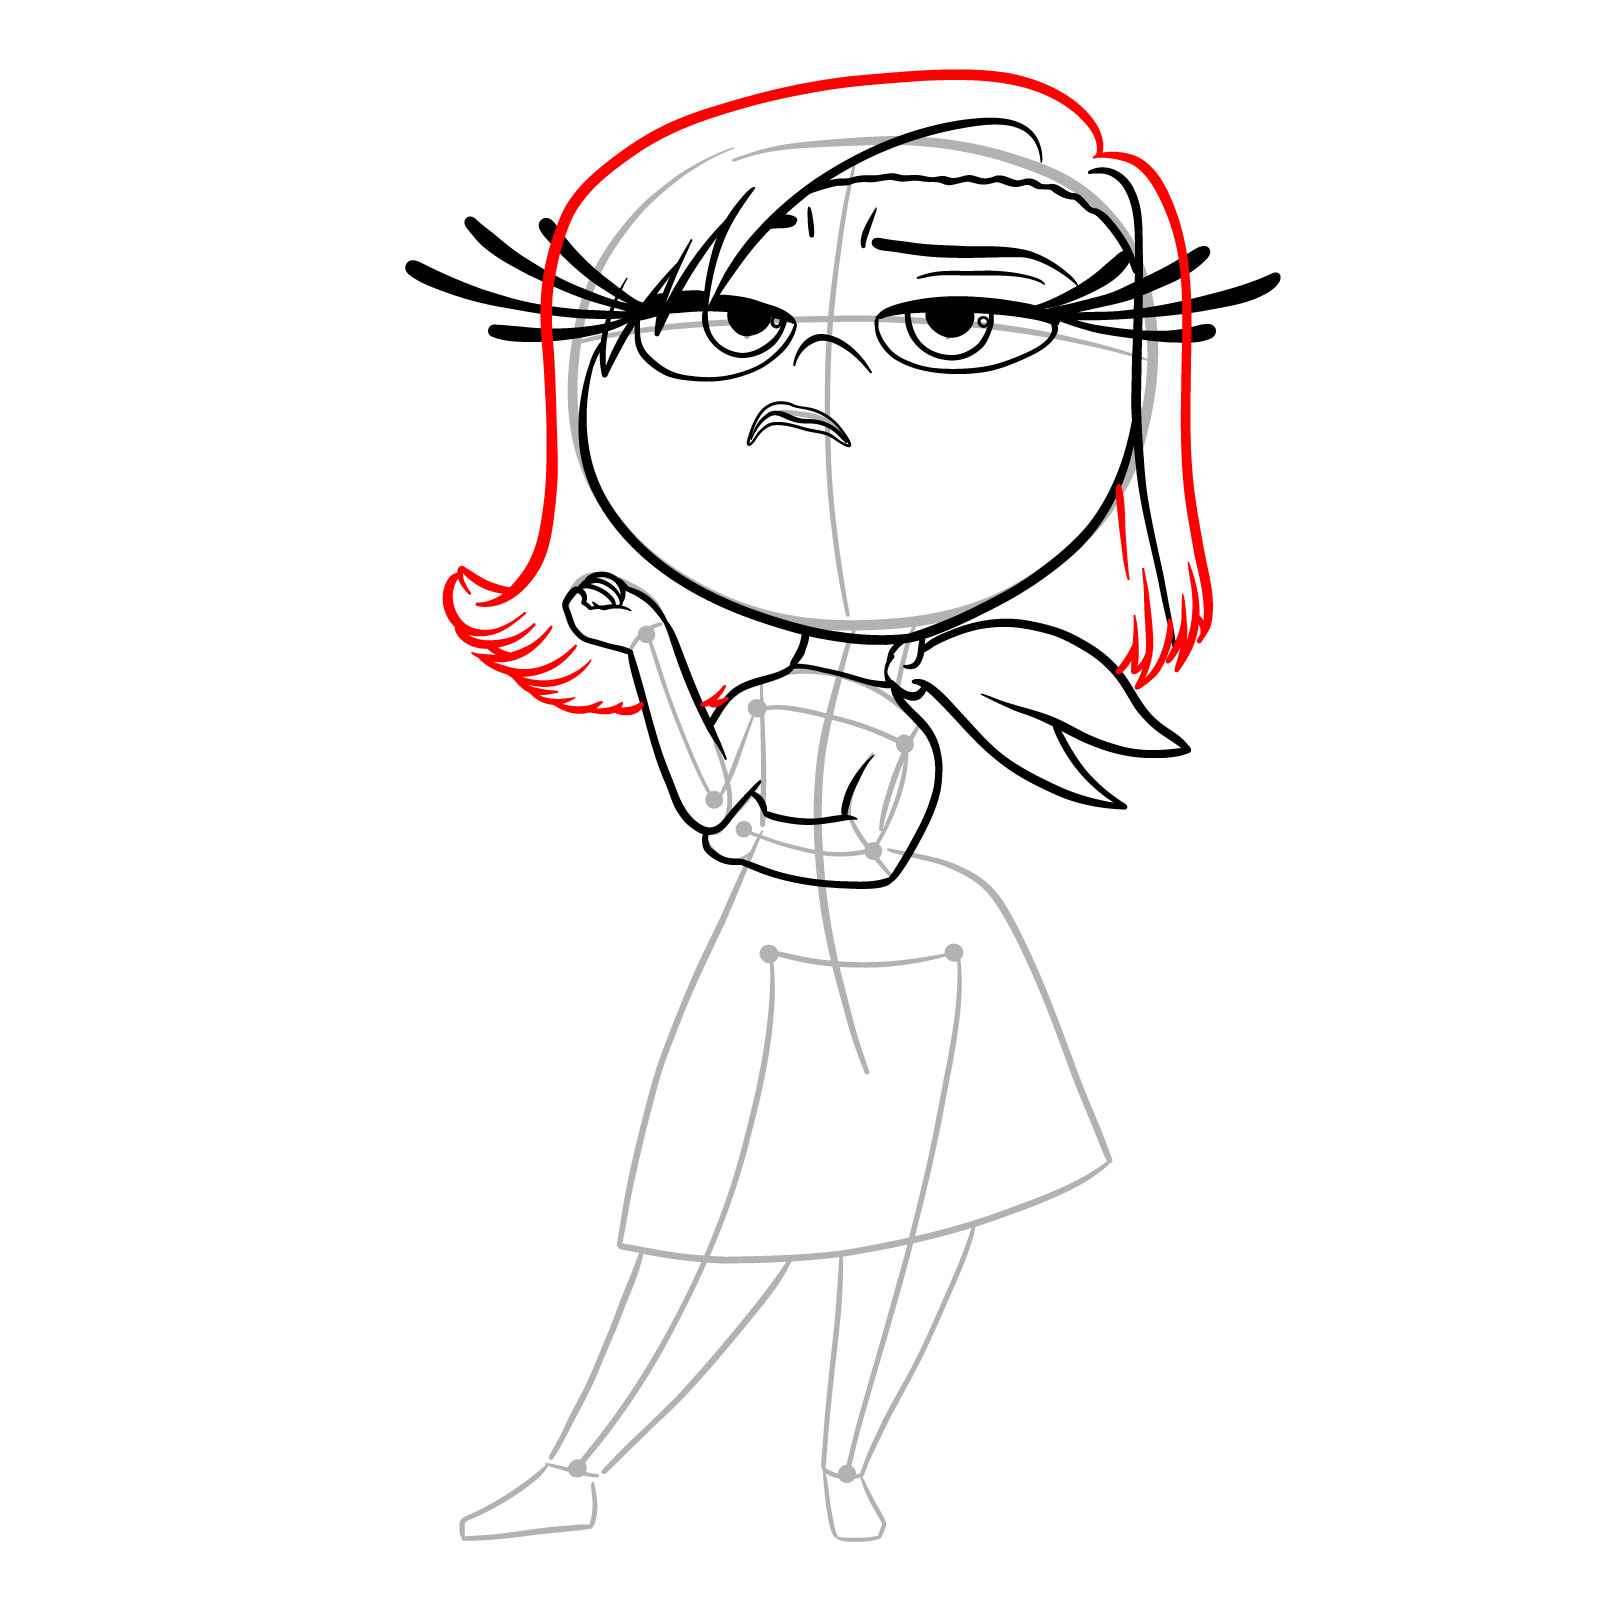 How to draw Disgust from Inside Out 2 - step 11